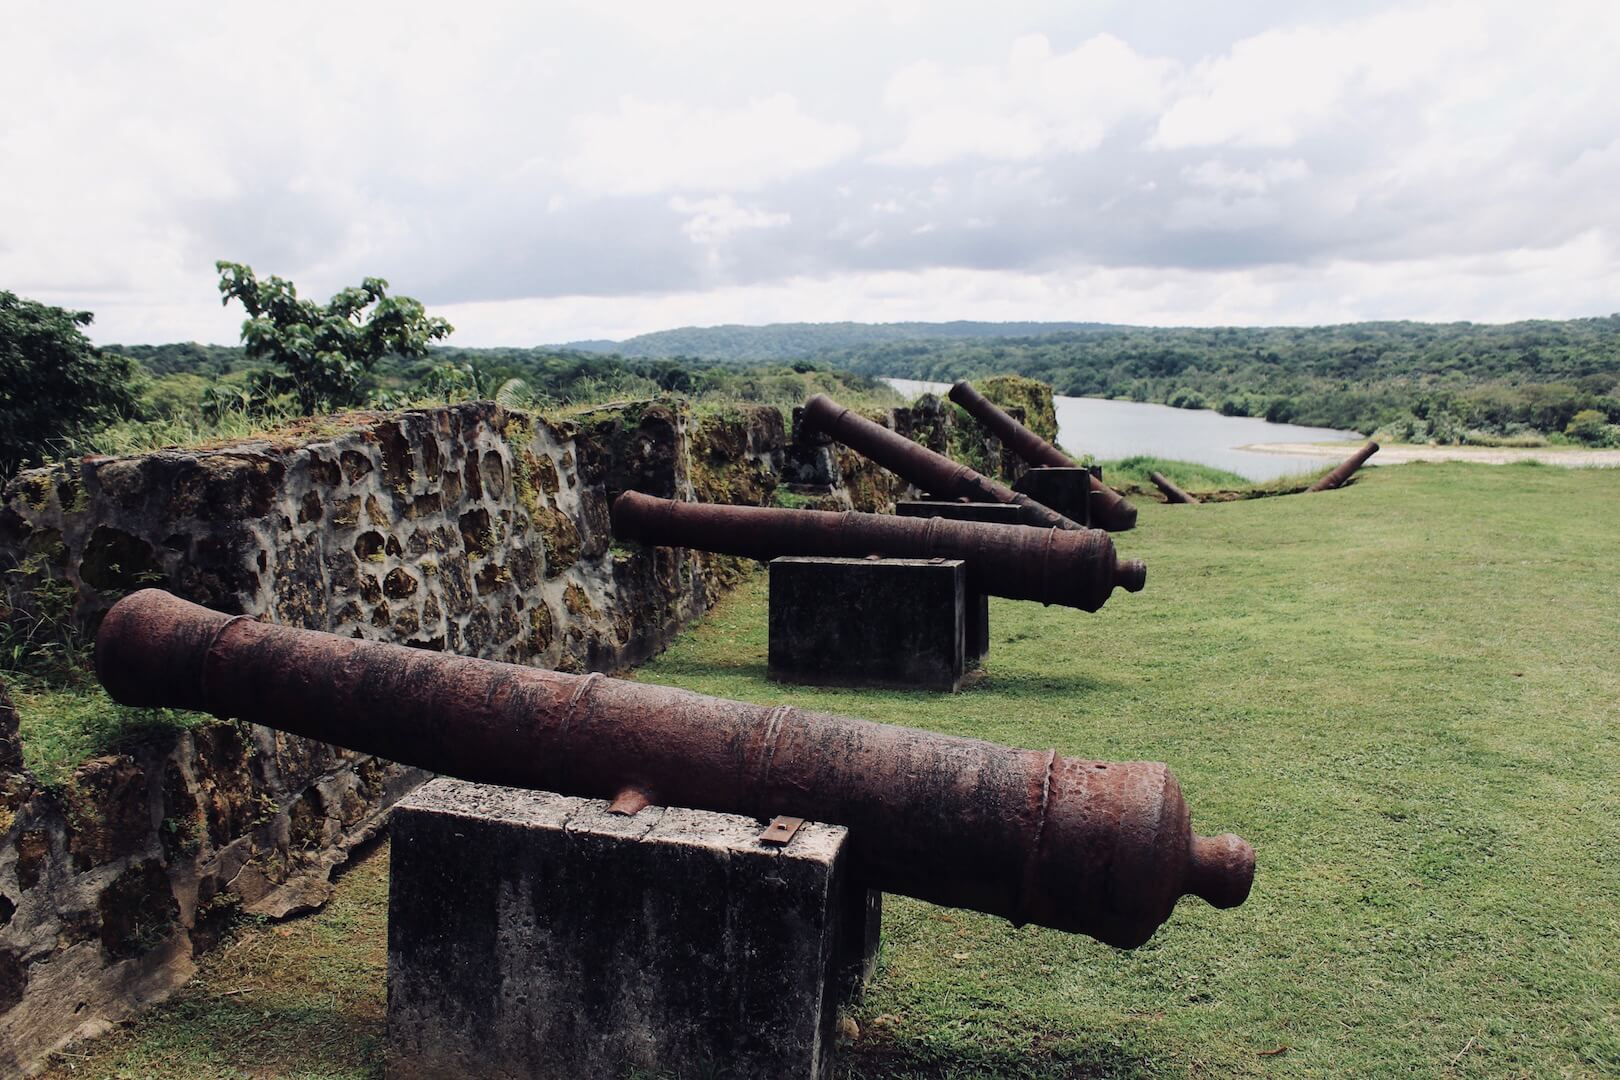 The Noriega Tapes Chapter 16 - Panama City - Fort San Lorenzo Cannons